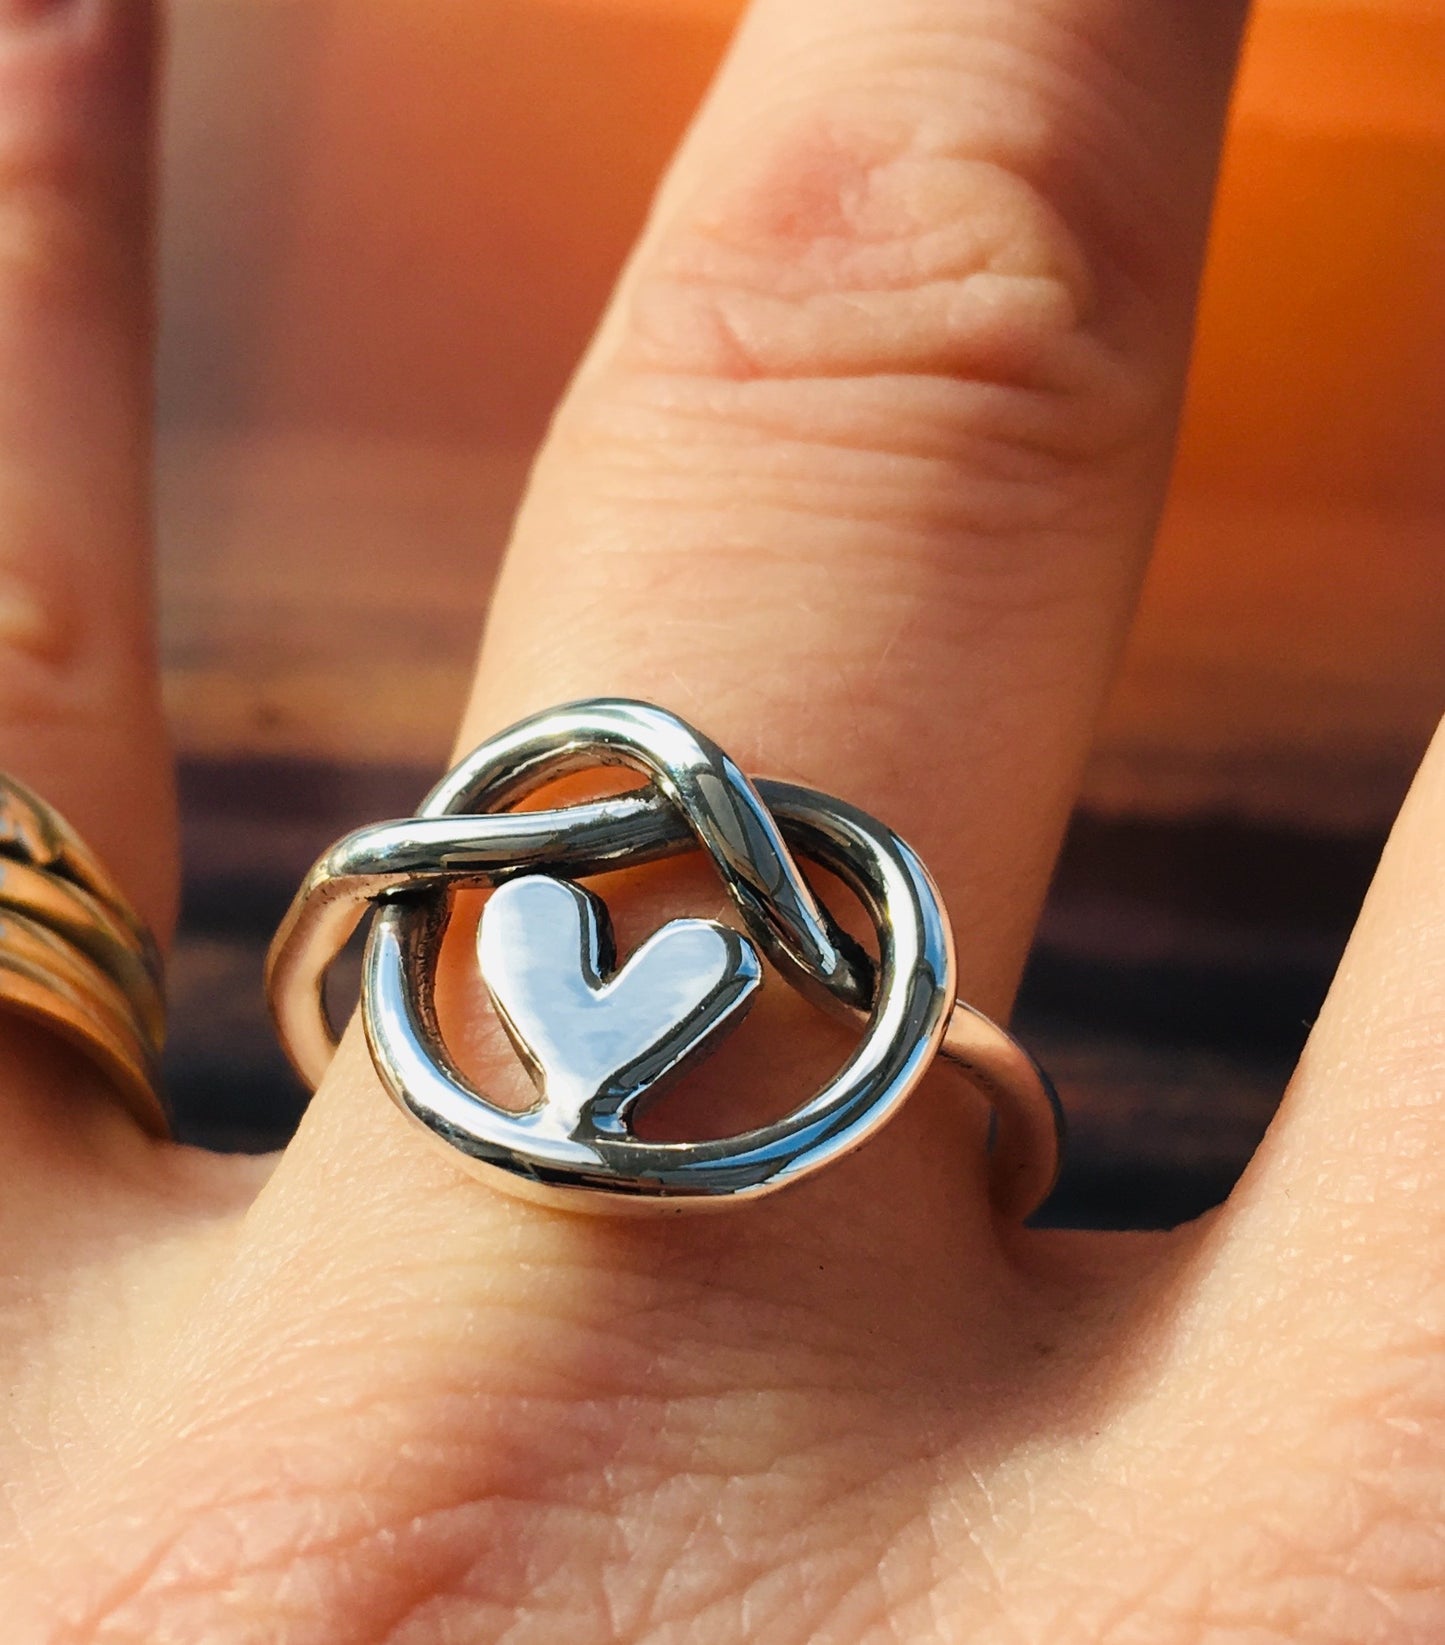 Knot of friendship heart ring